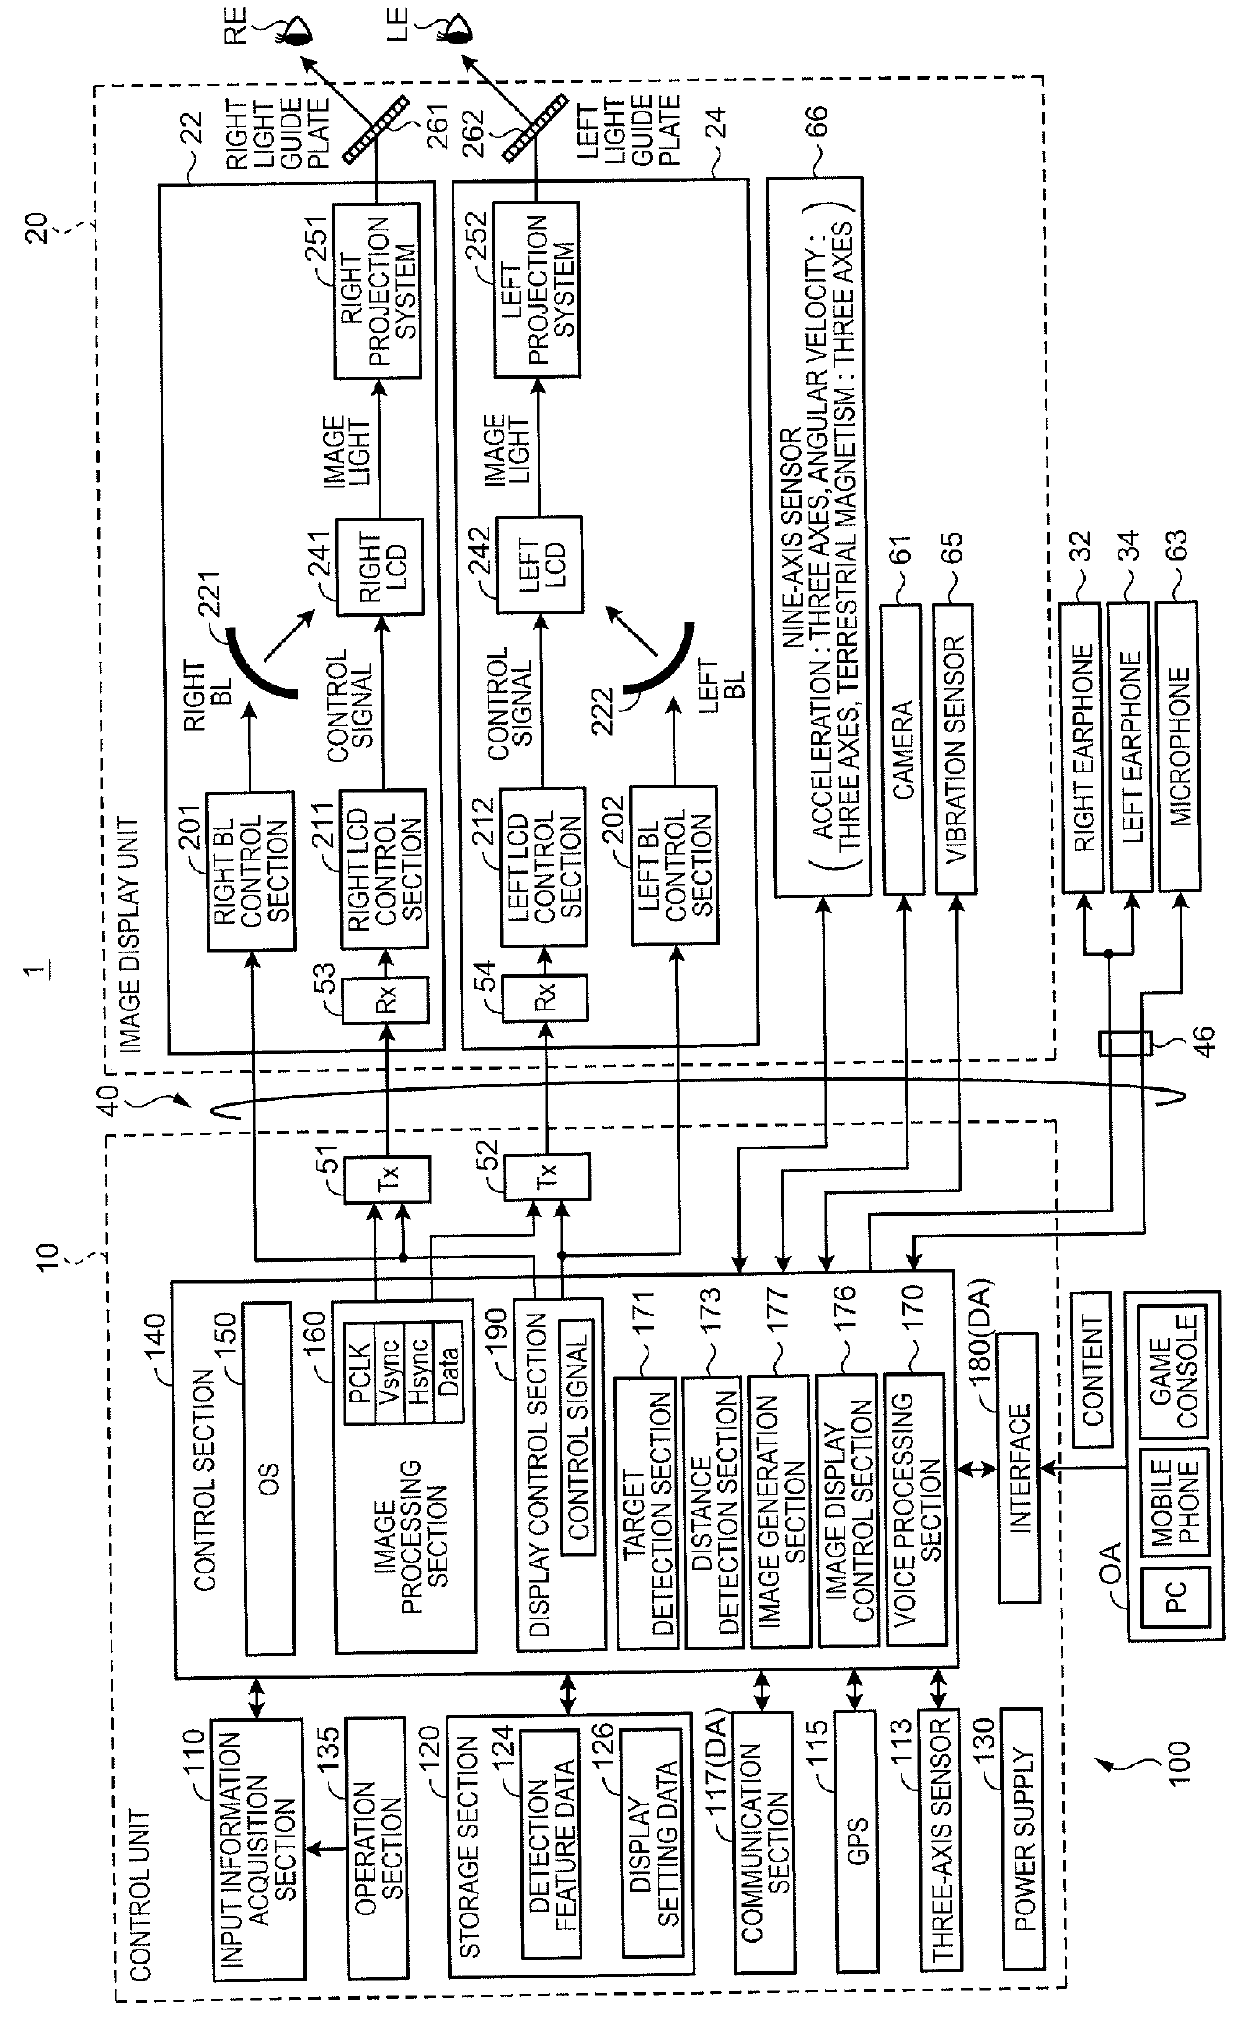 Display apparatus, method for controlling display apparatus, and program